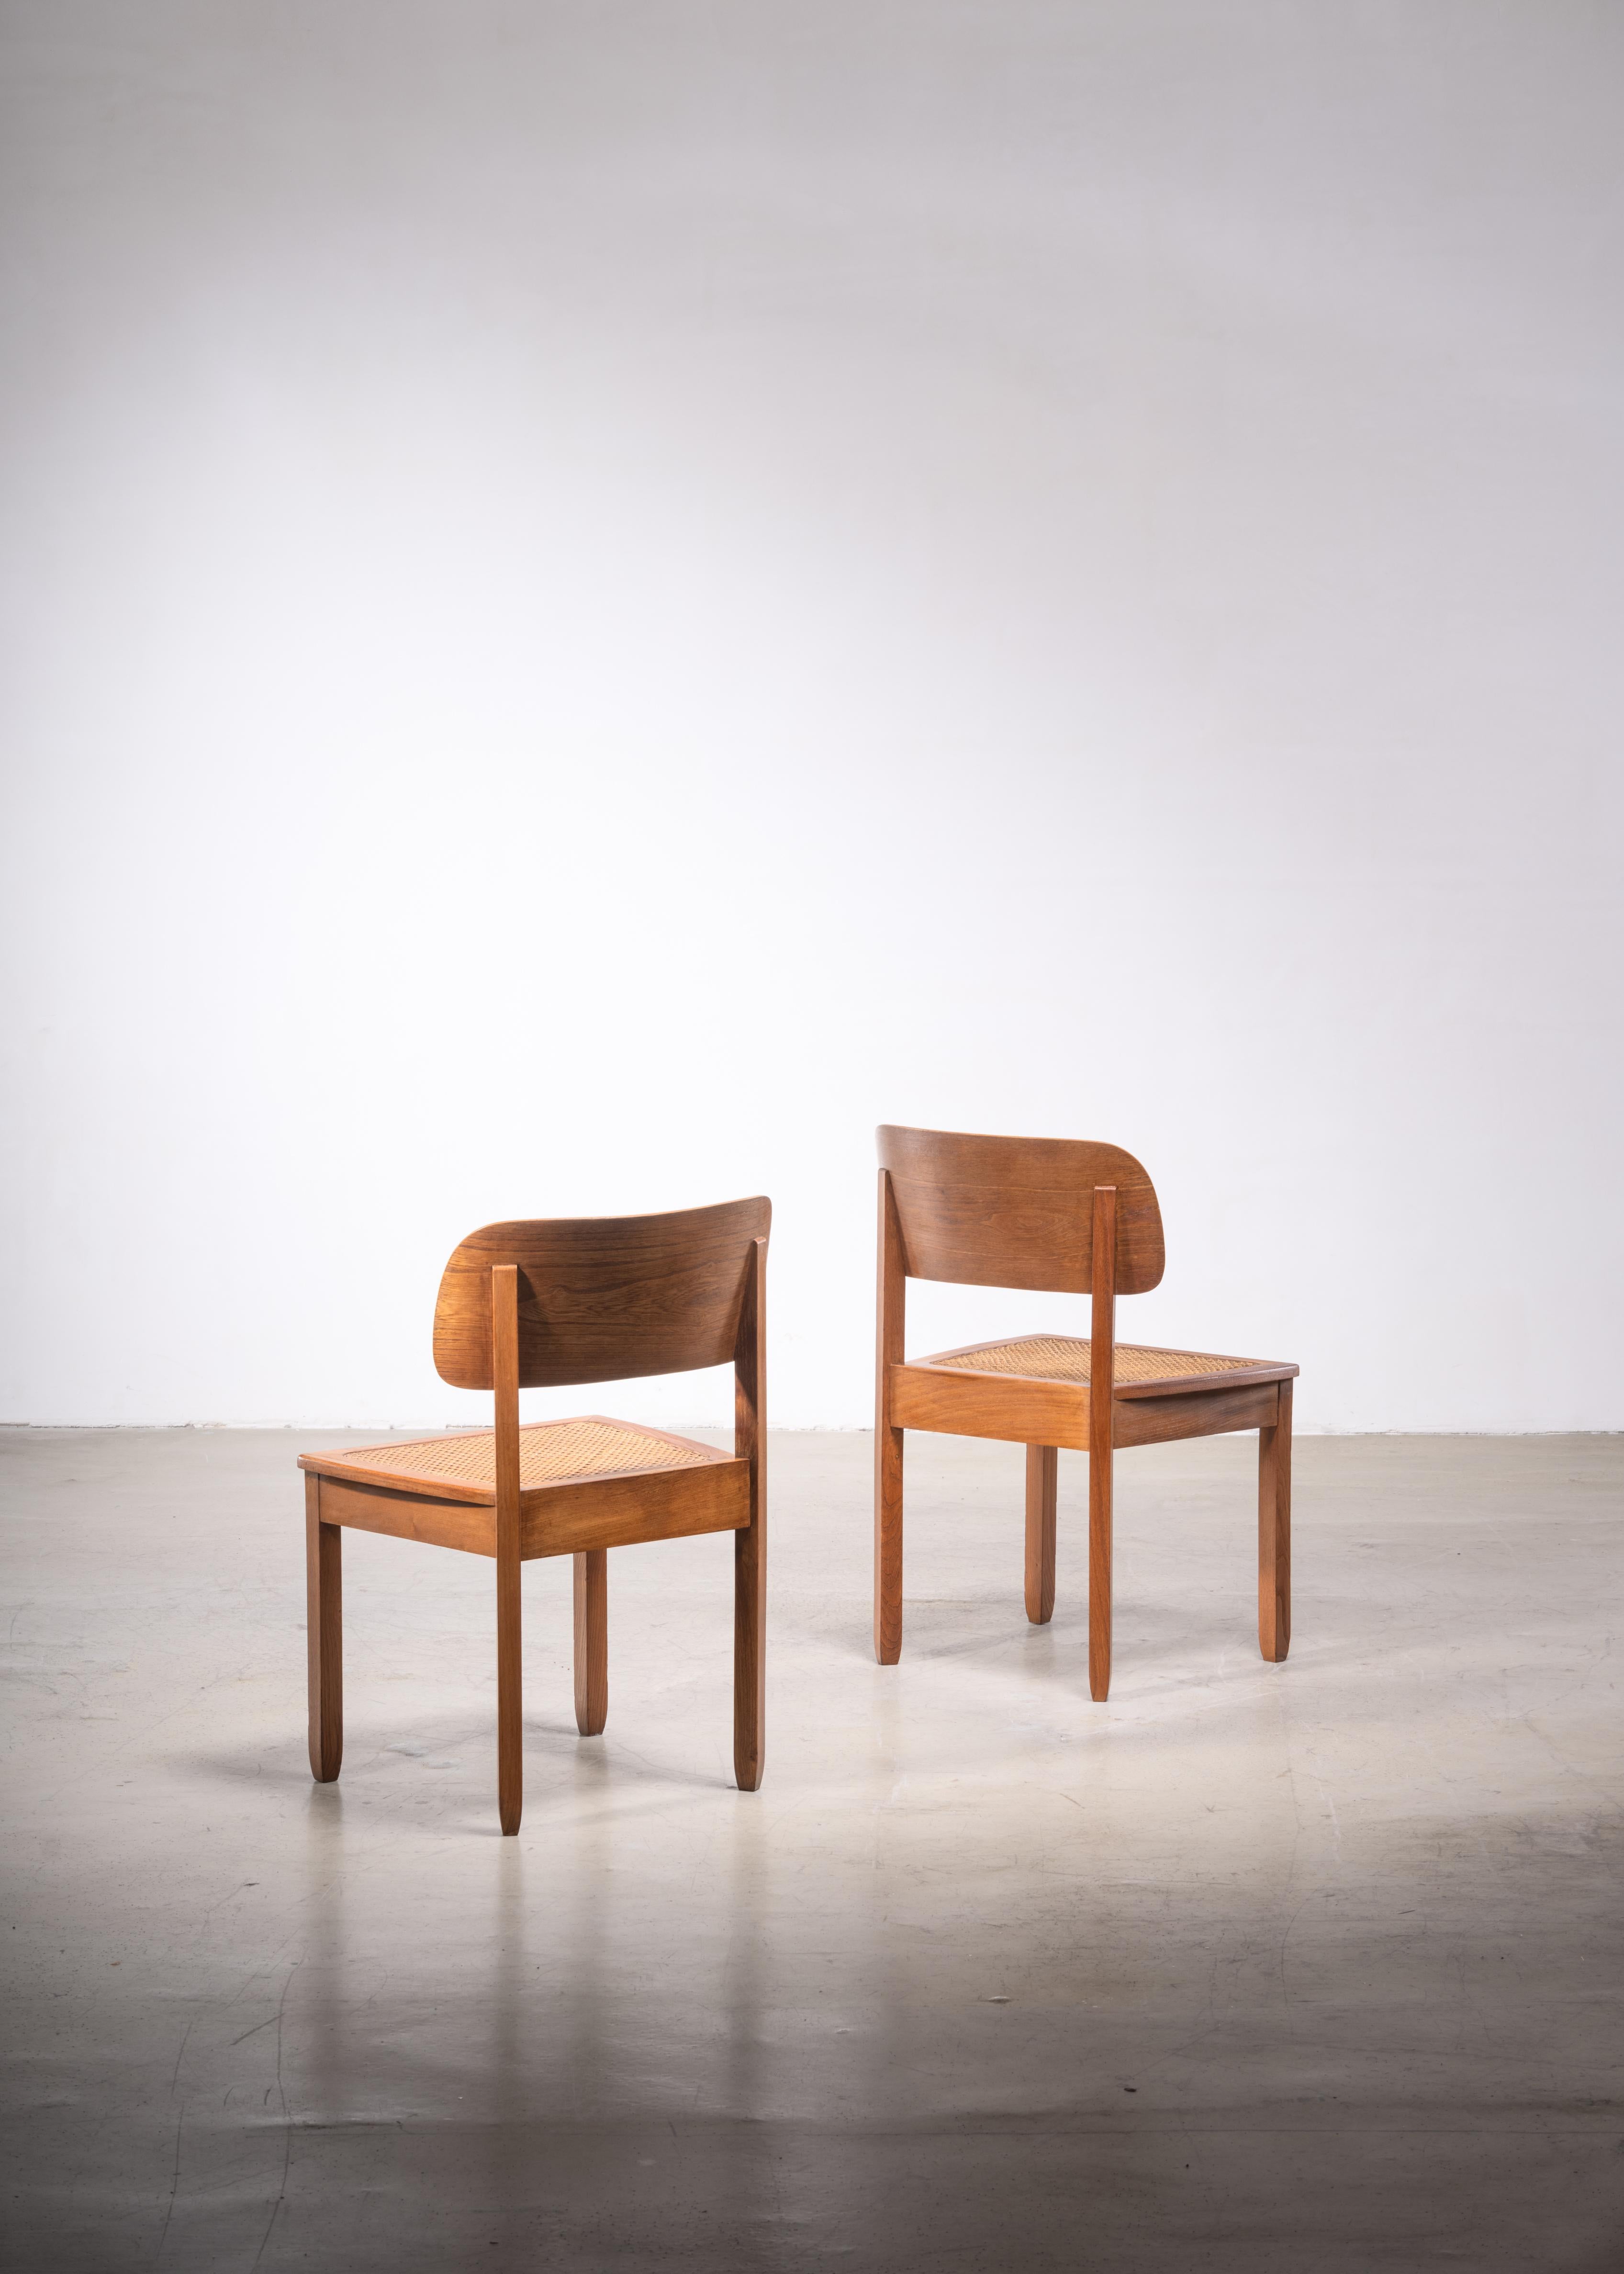 A pair of 1930s chairs by German designer Karl Bertsch (1873-1933) for the Deutsche Werkstätten Hellerau, Dresden. These very light chairs are made of wood with a curved backrest and a woven cane seating. Wonderful original condition.